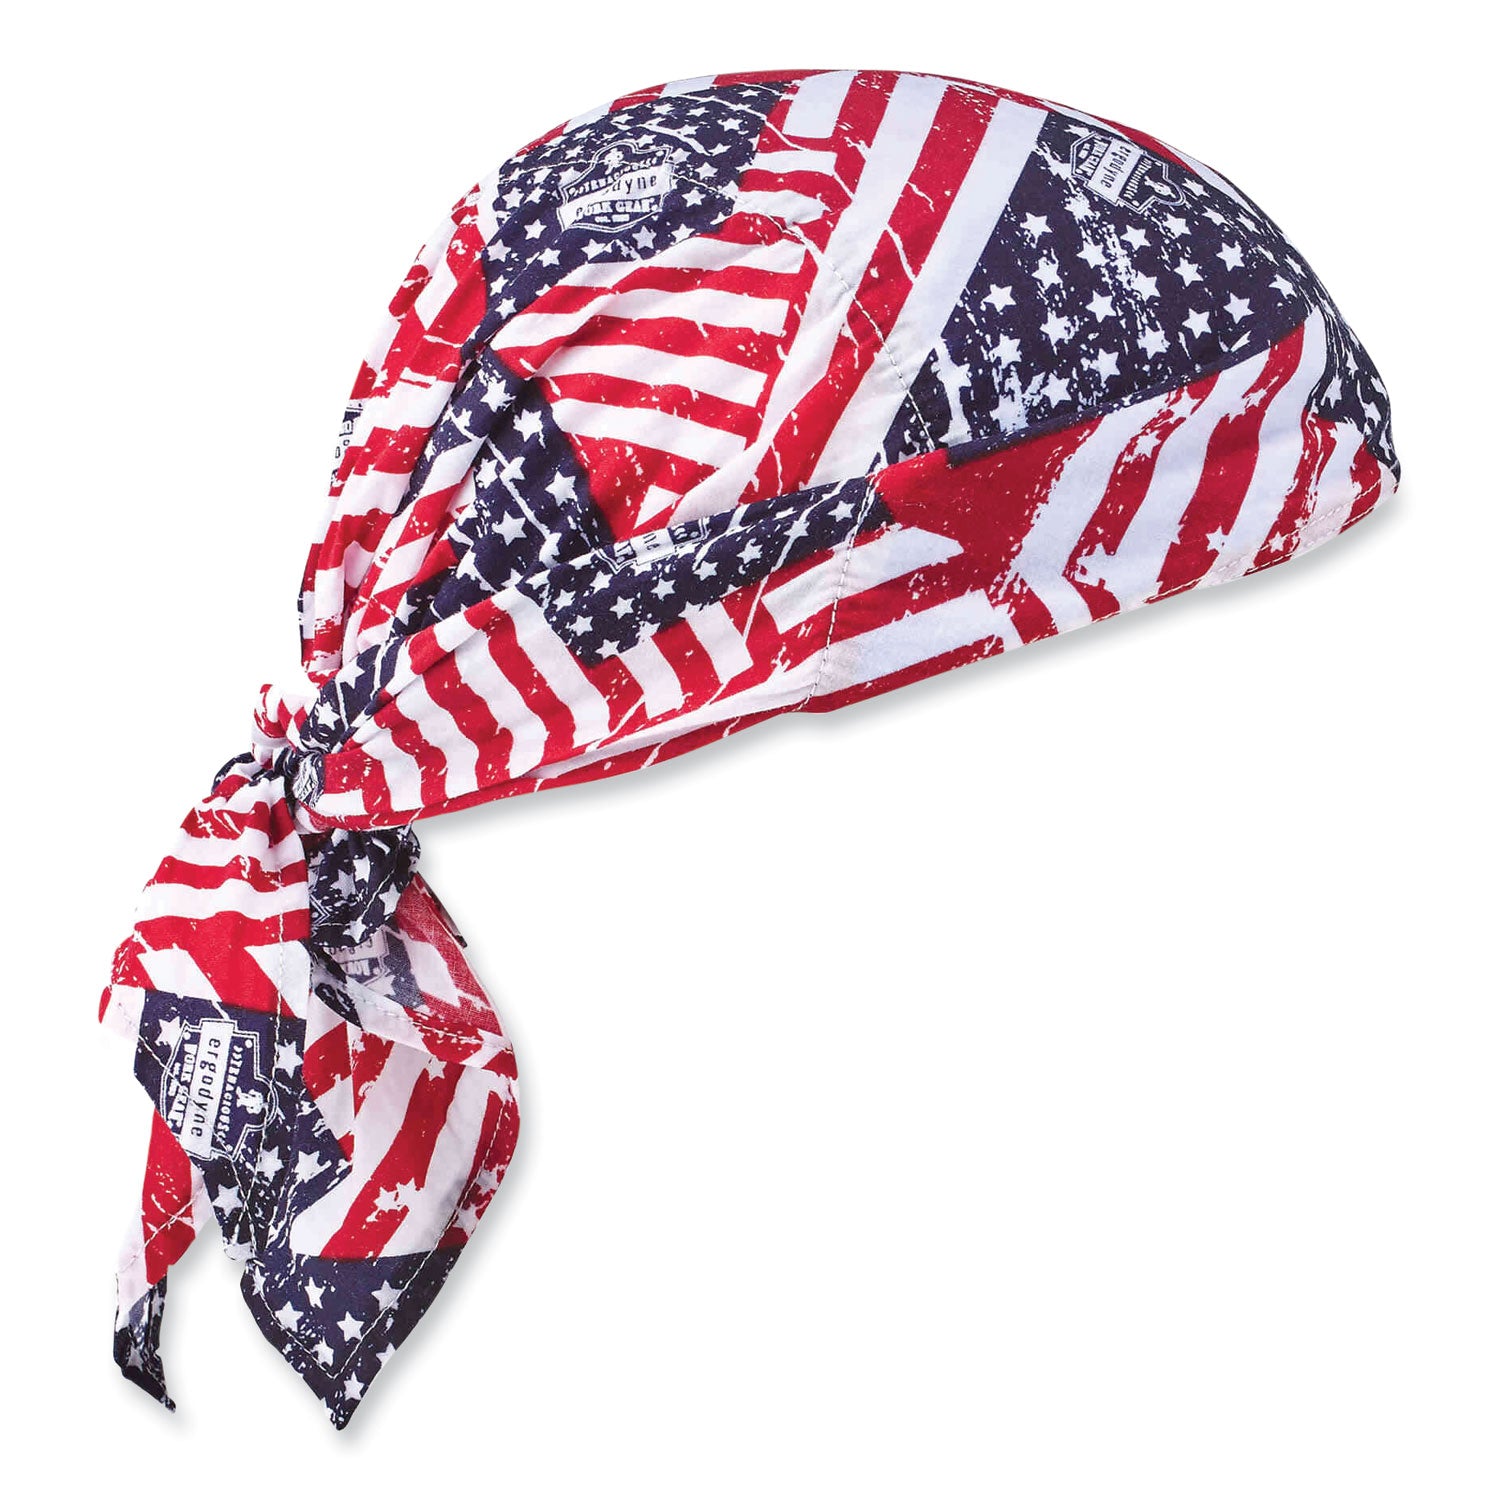 chill-its-6710ct-cooling-pva-tie-bandana-triangle-hat-one-size-fits-most-stars-and-stripes-ships-in-1-3-business-days_ego12581 - 1